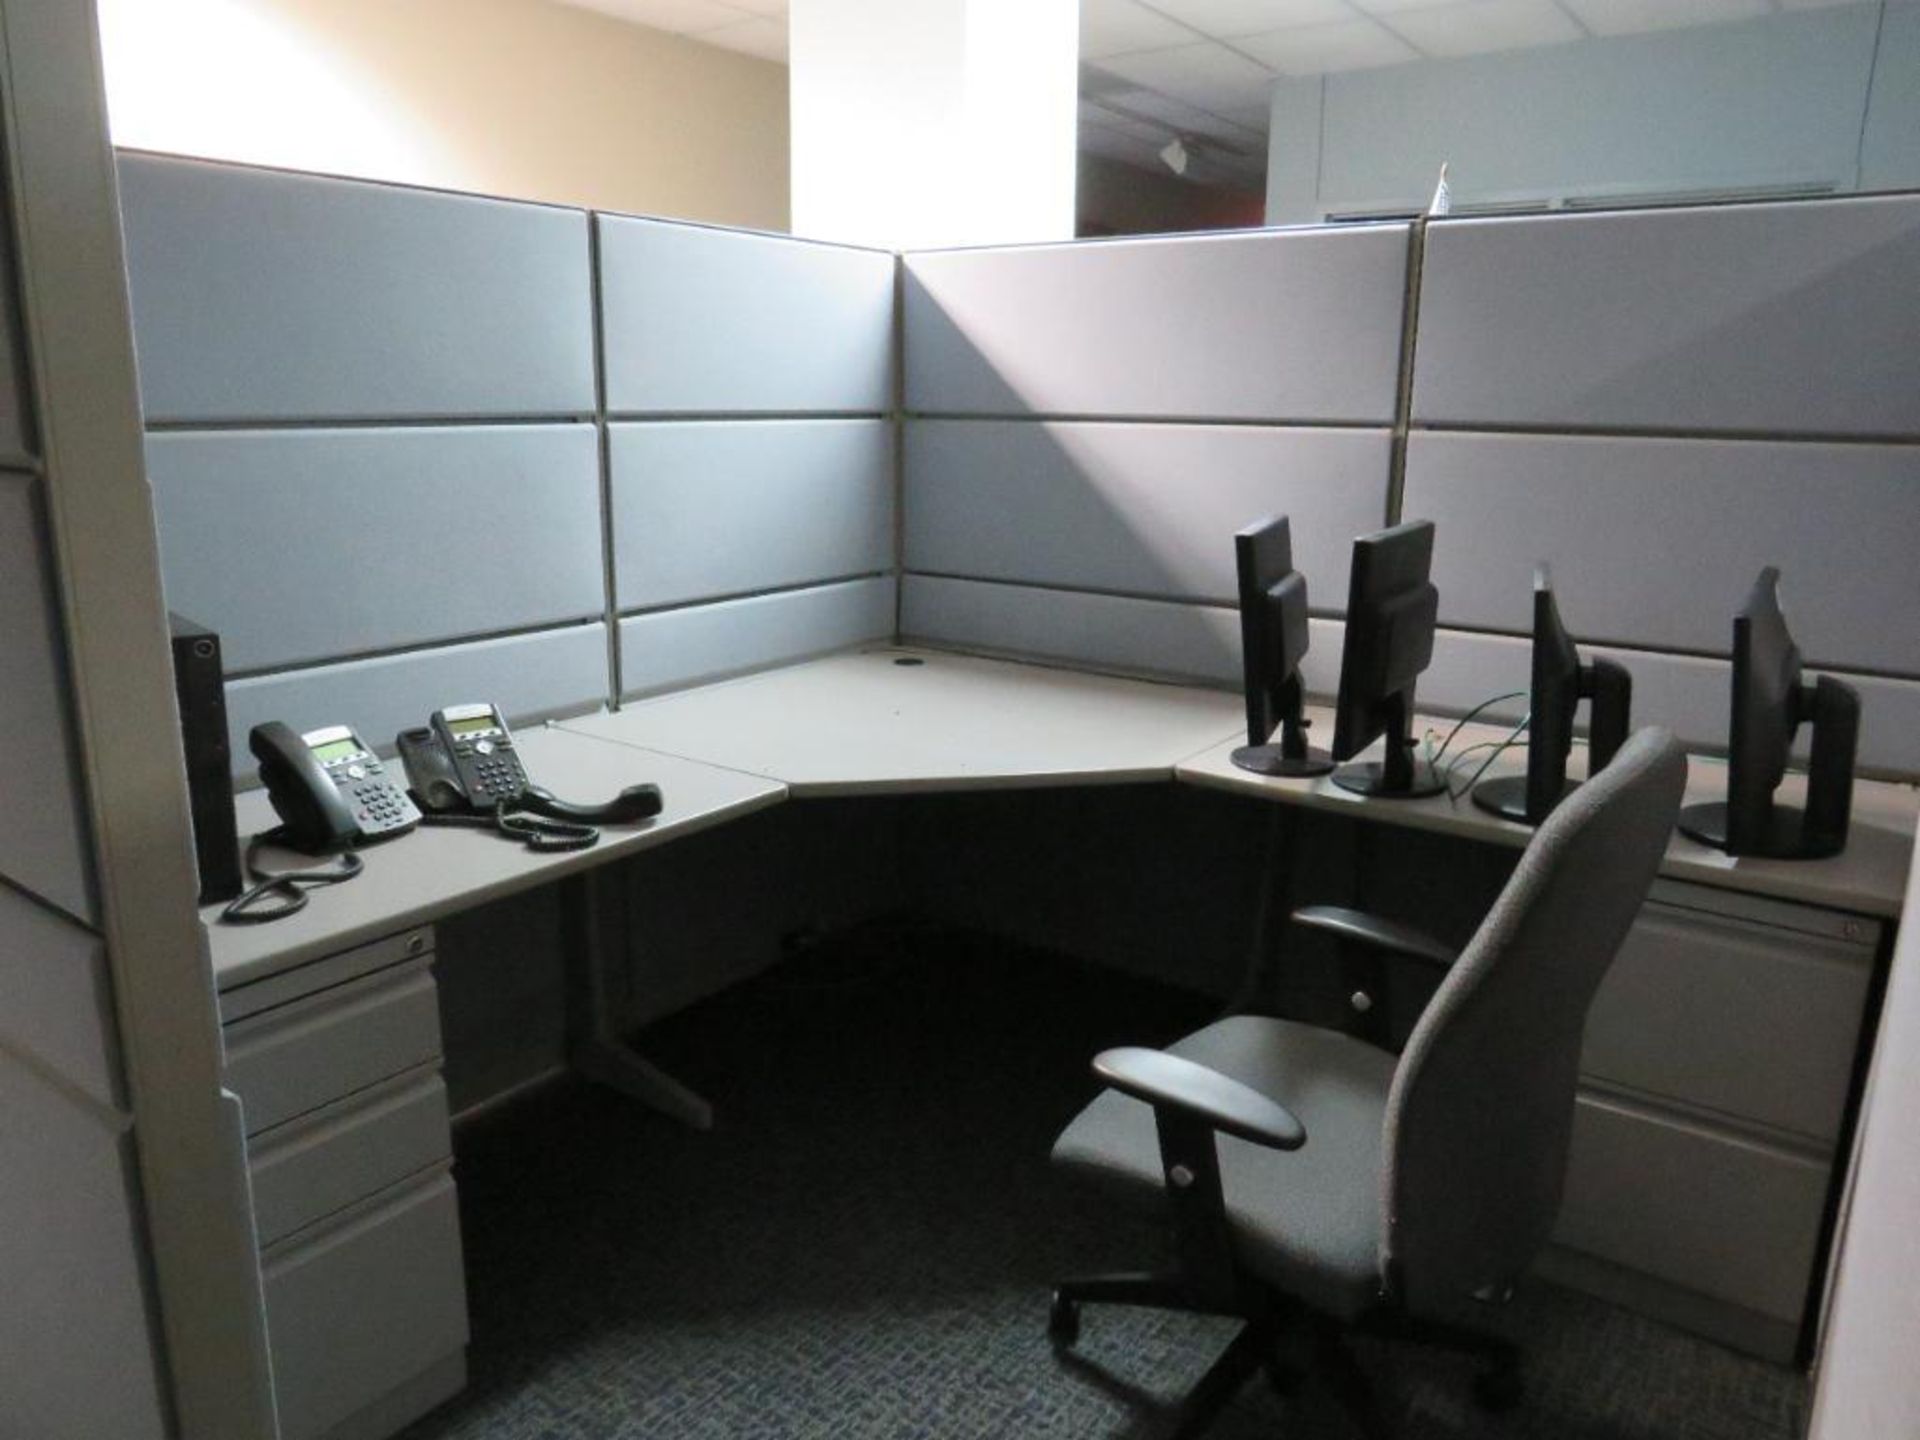 Lot c/o: Large Quantity of Cubicle Partitions w/ Hanging Work Table, on 2nd Floor Approx. 7,100 Sq. - Image 3 of 8